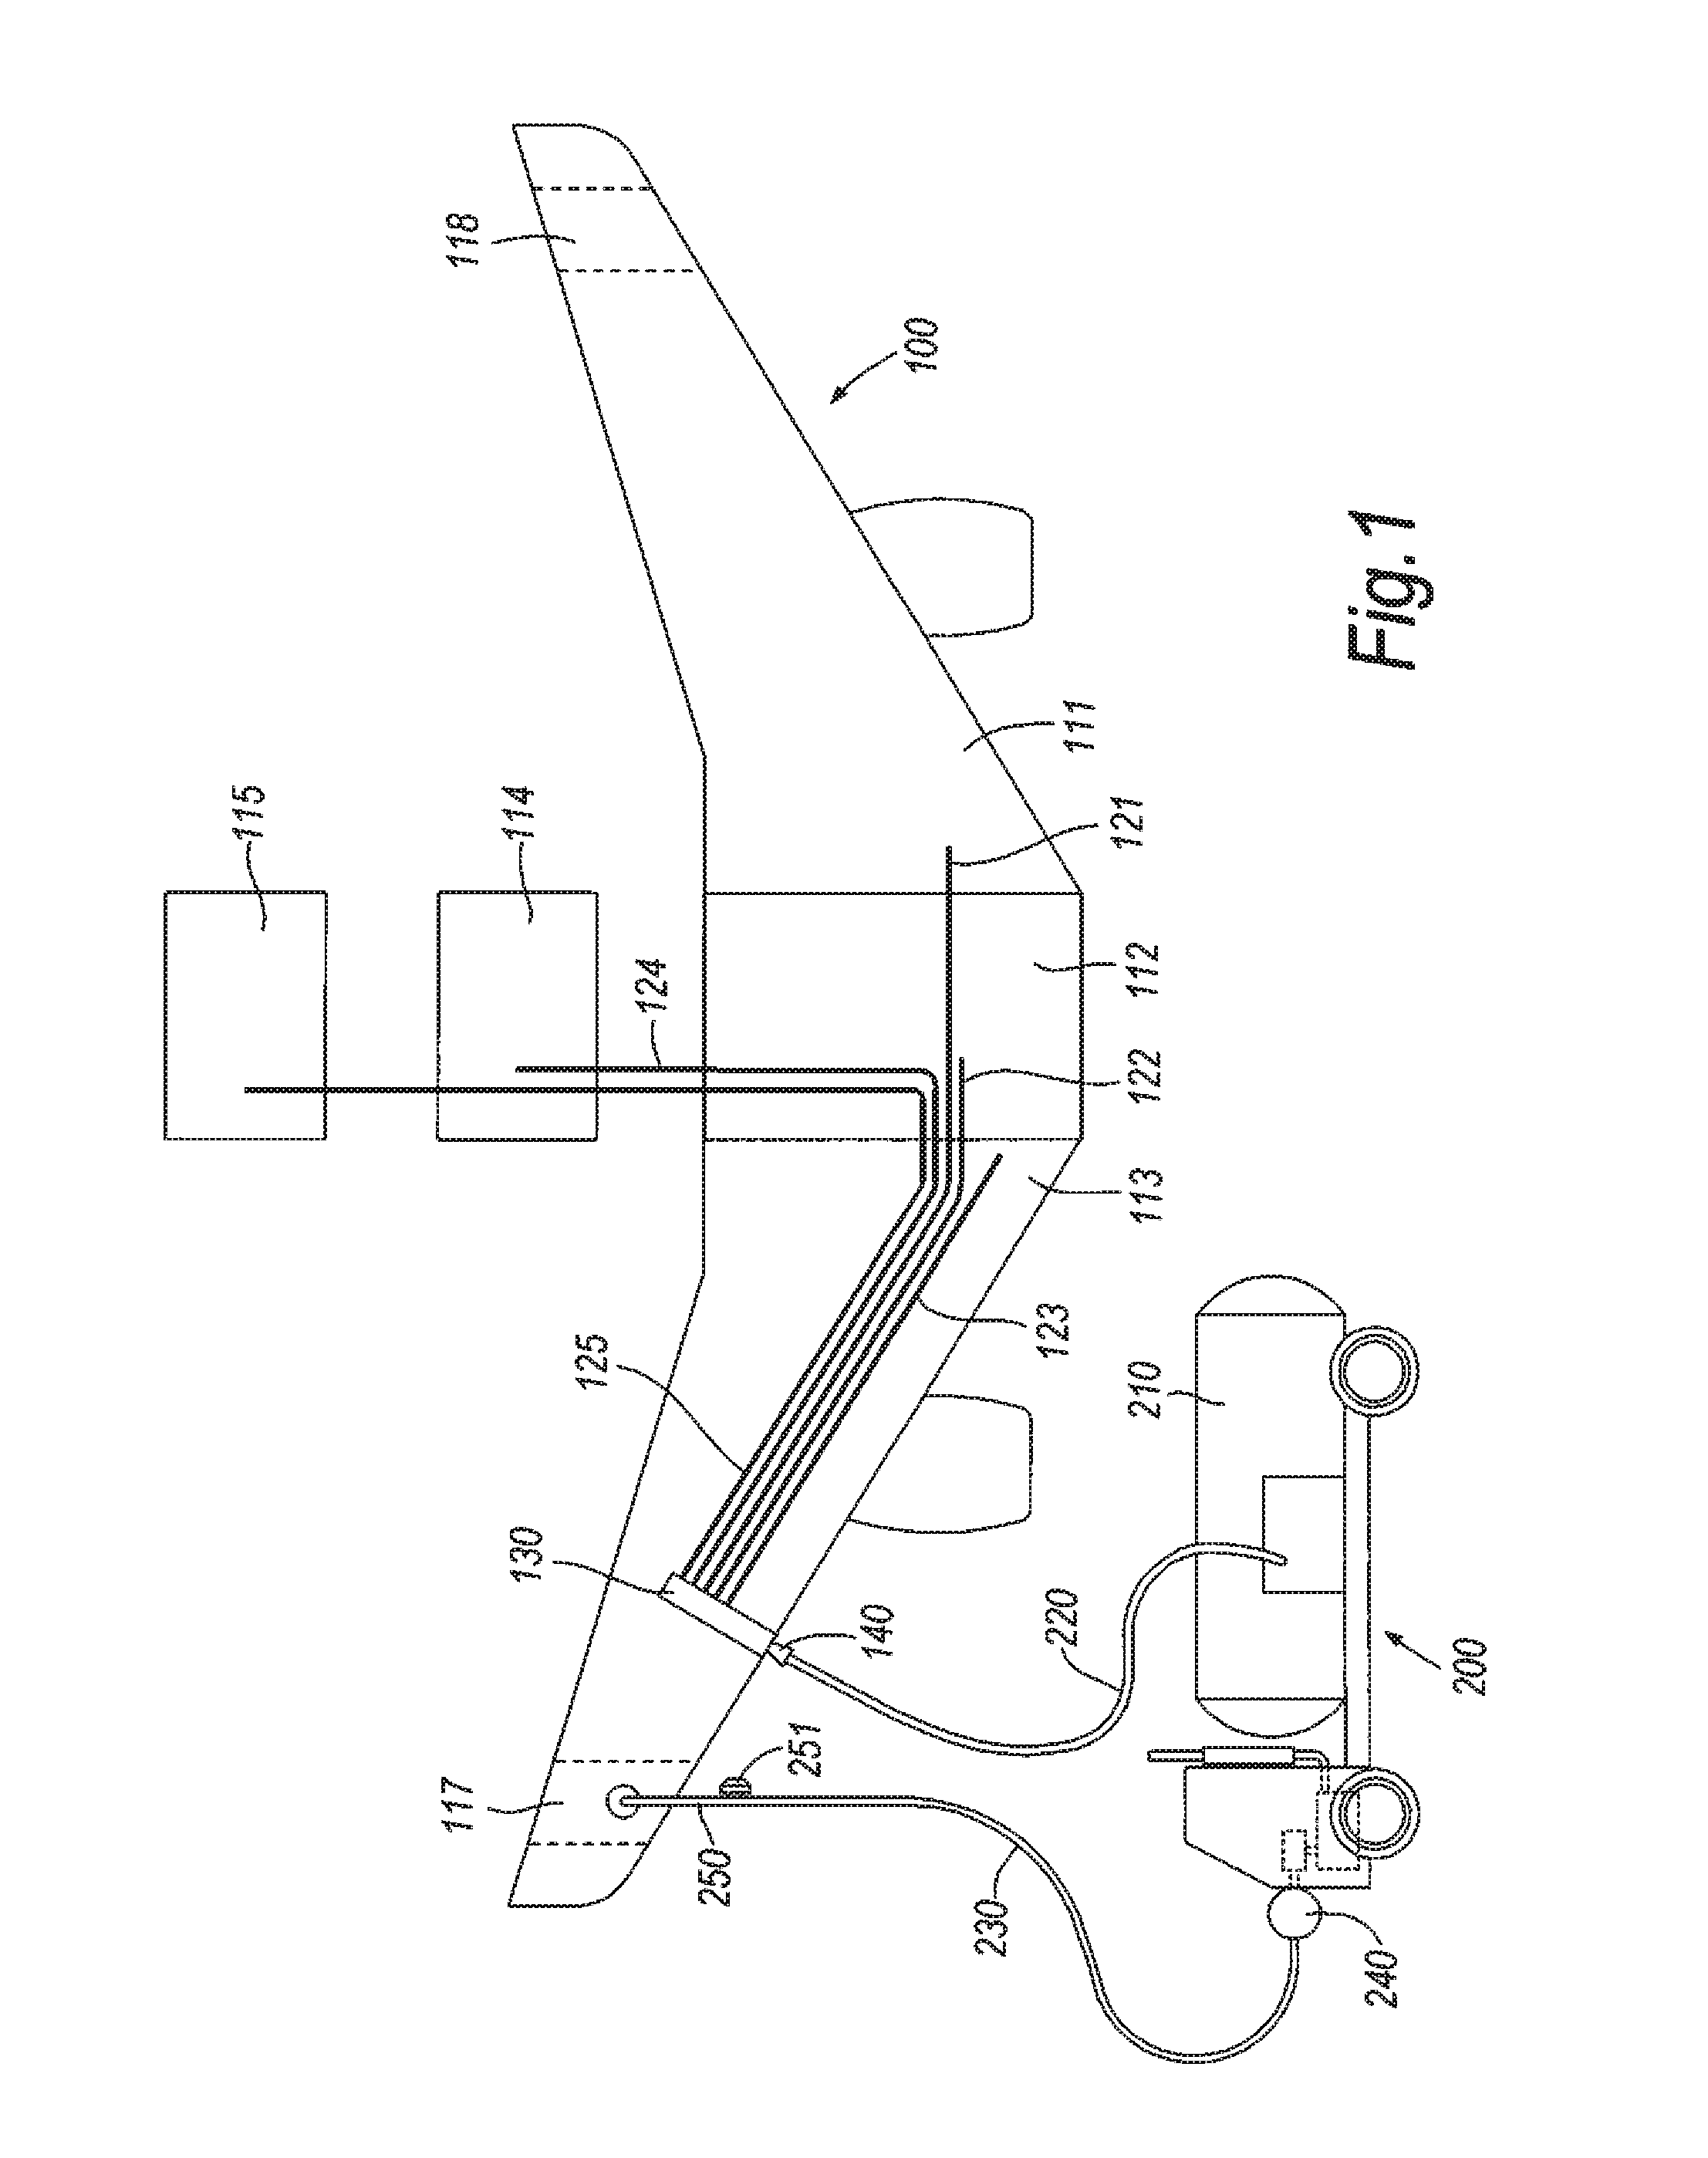 Refuel control system and method of refuelling